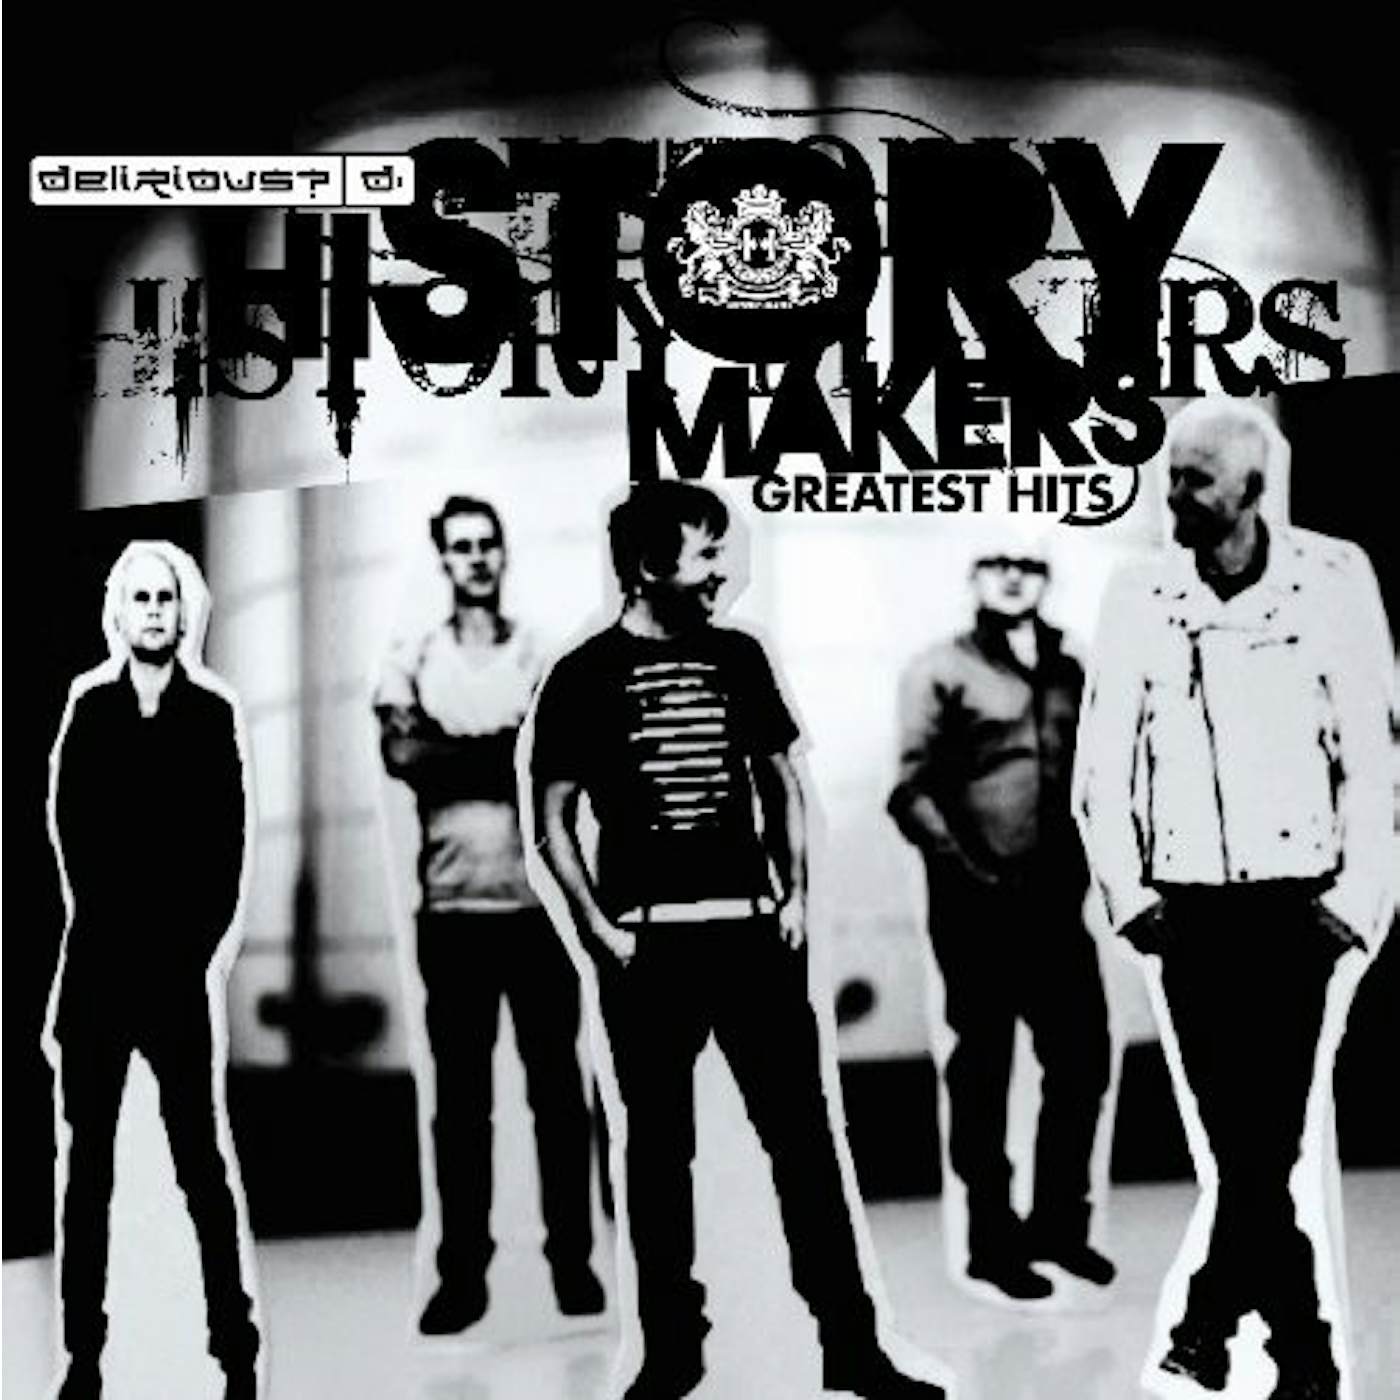 Delirious? HISTORY MAKERS: GREATEST HITS CD